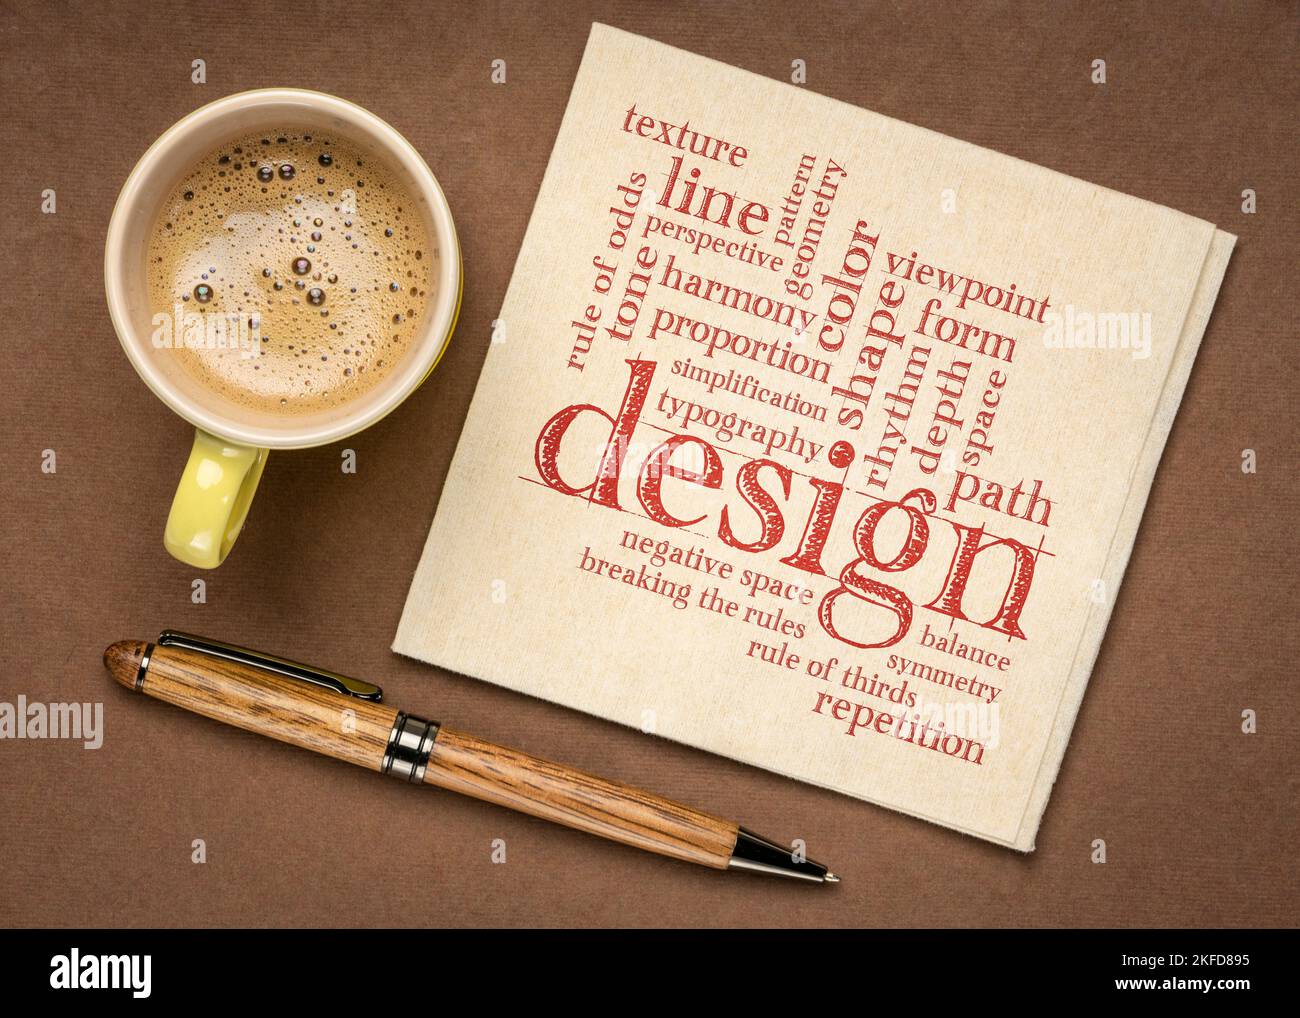 design elements and rules word cloud on a napkin, flat lay with coffee Stock Photo